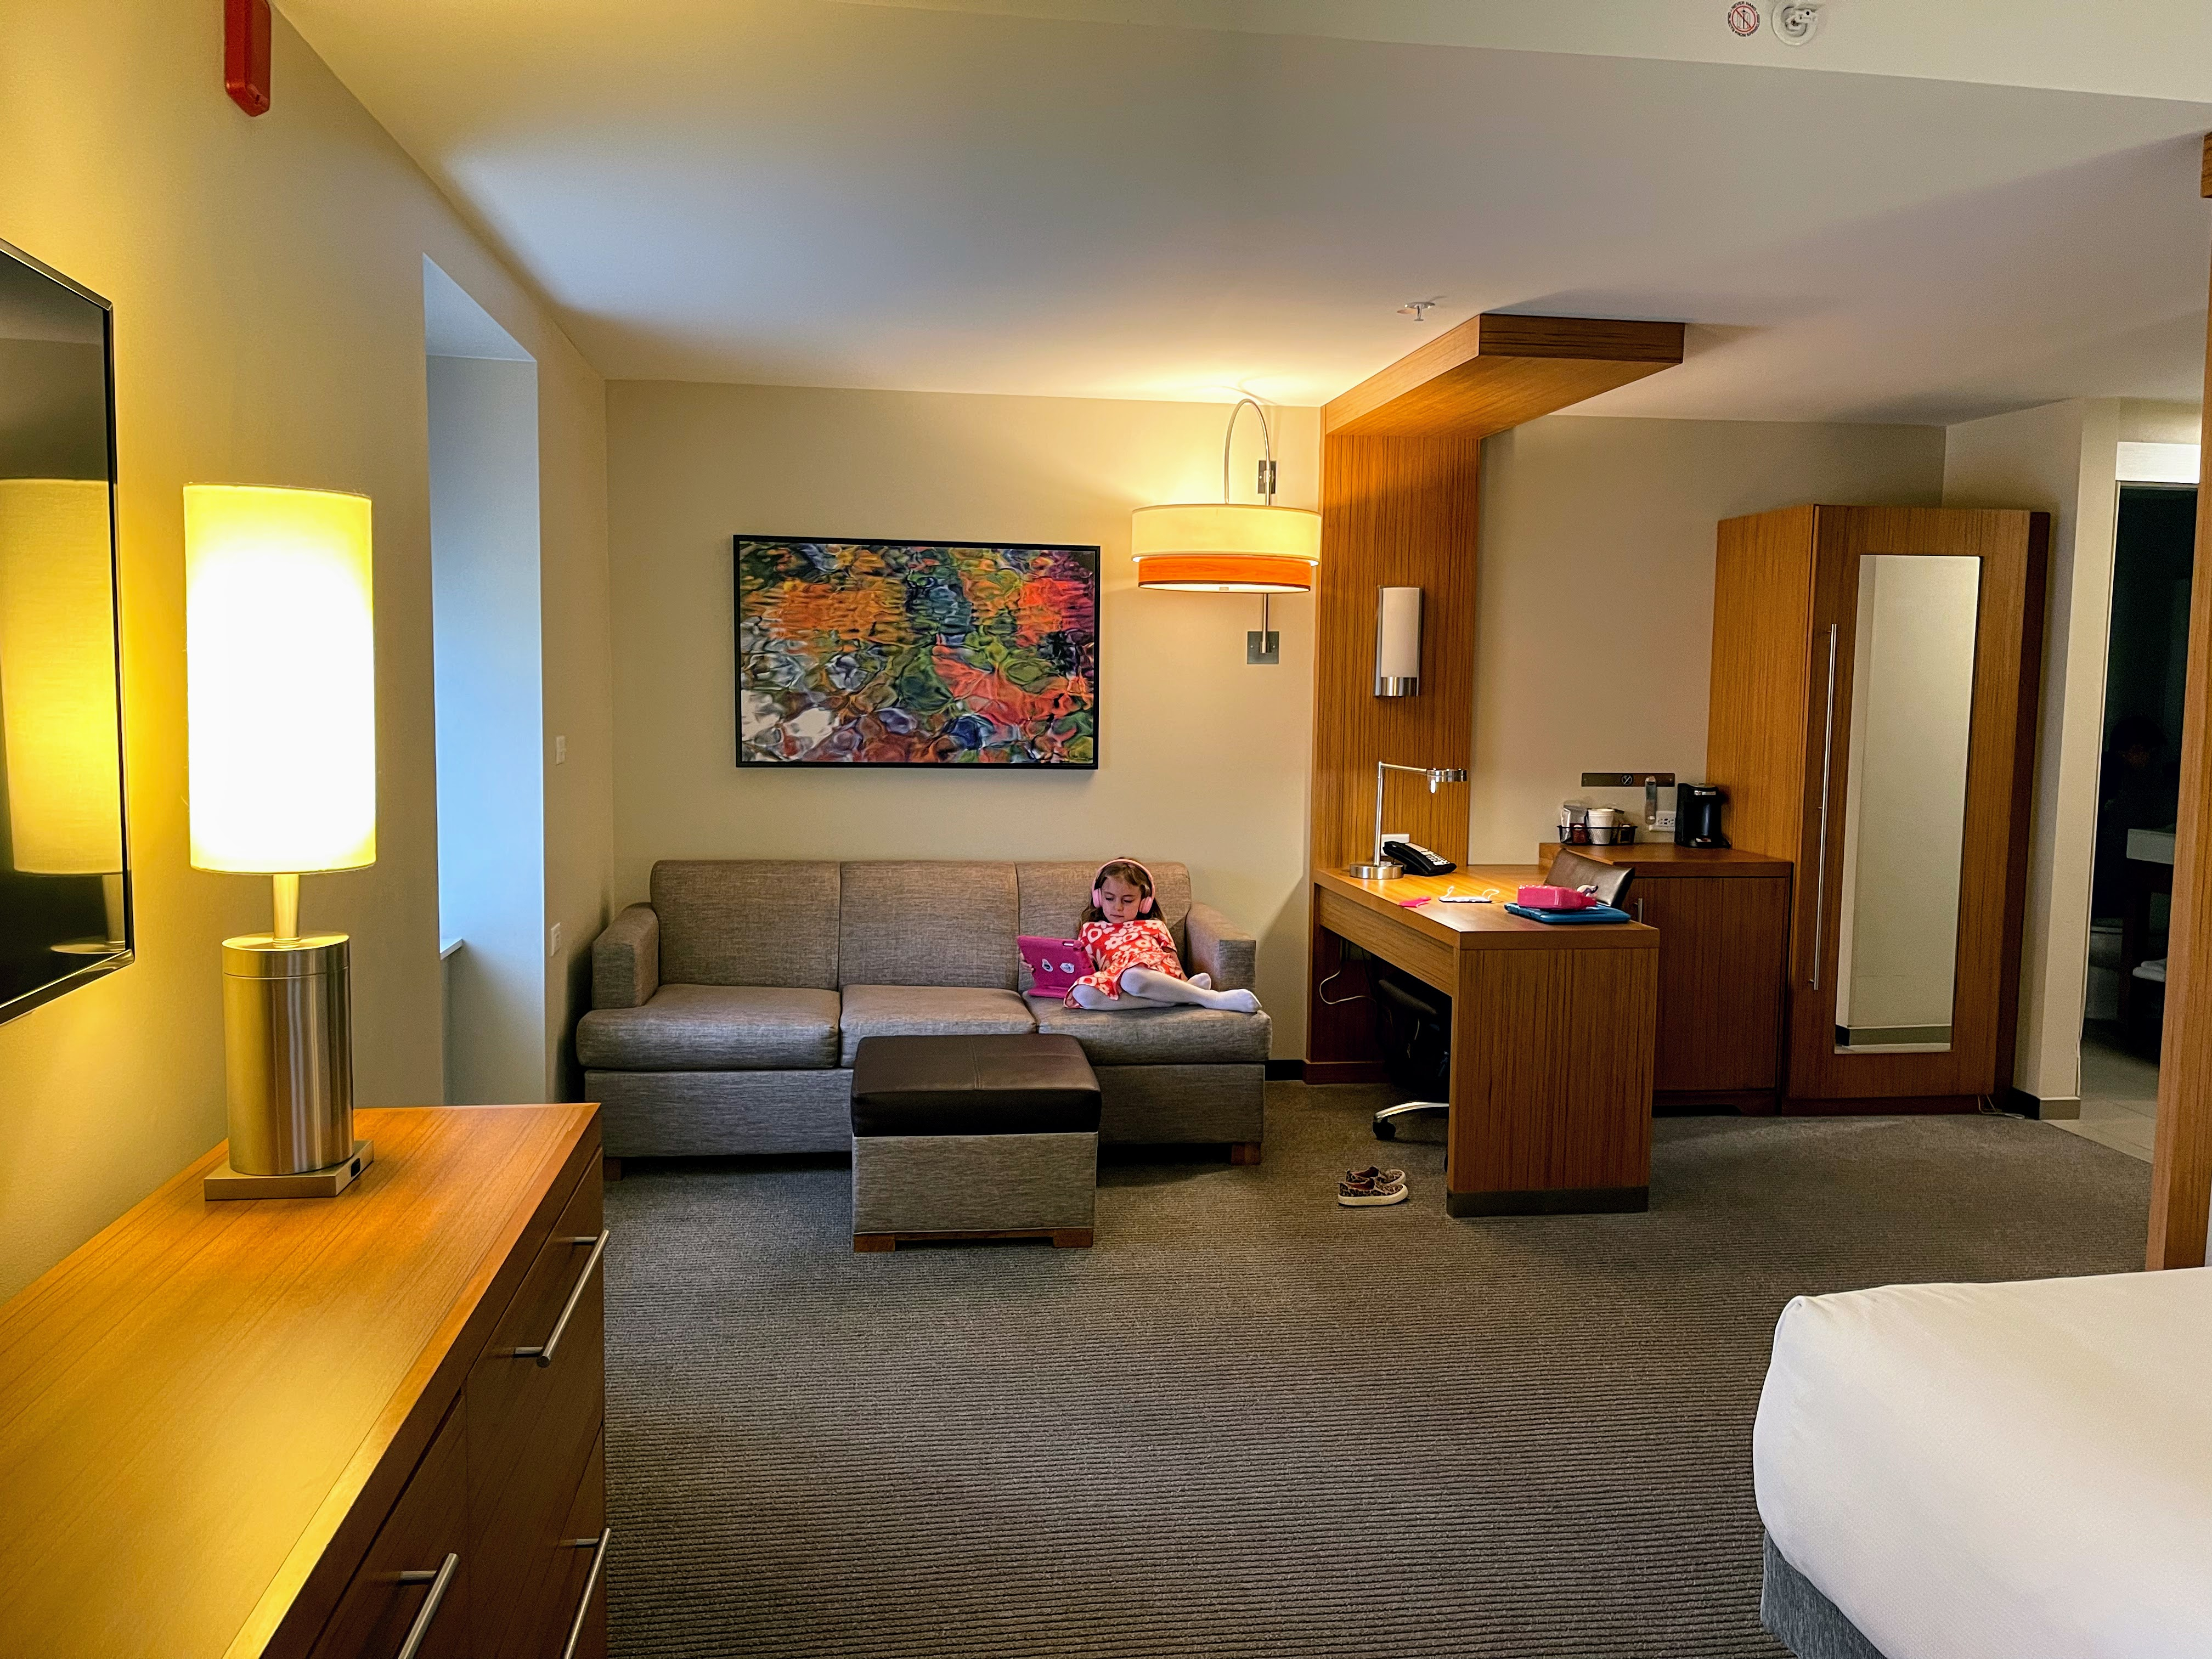 Hyatt Place Knoxville Two Queens room couch and desk